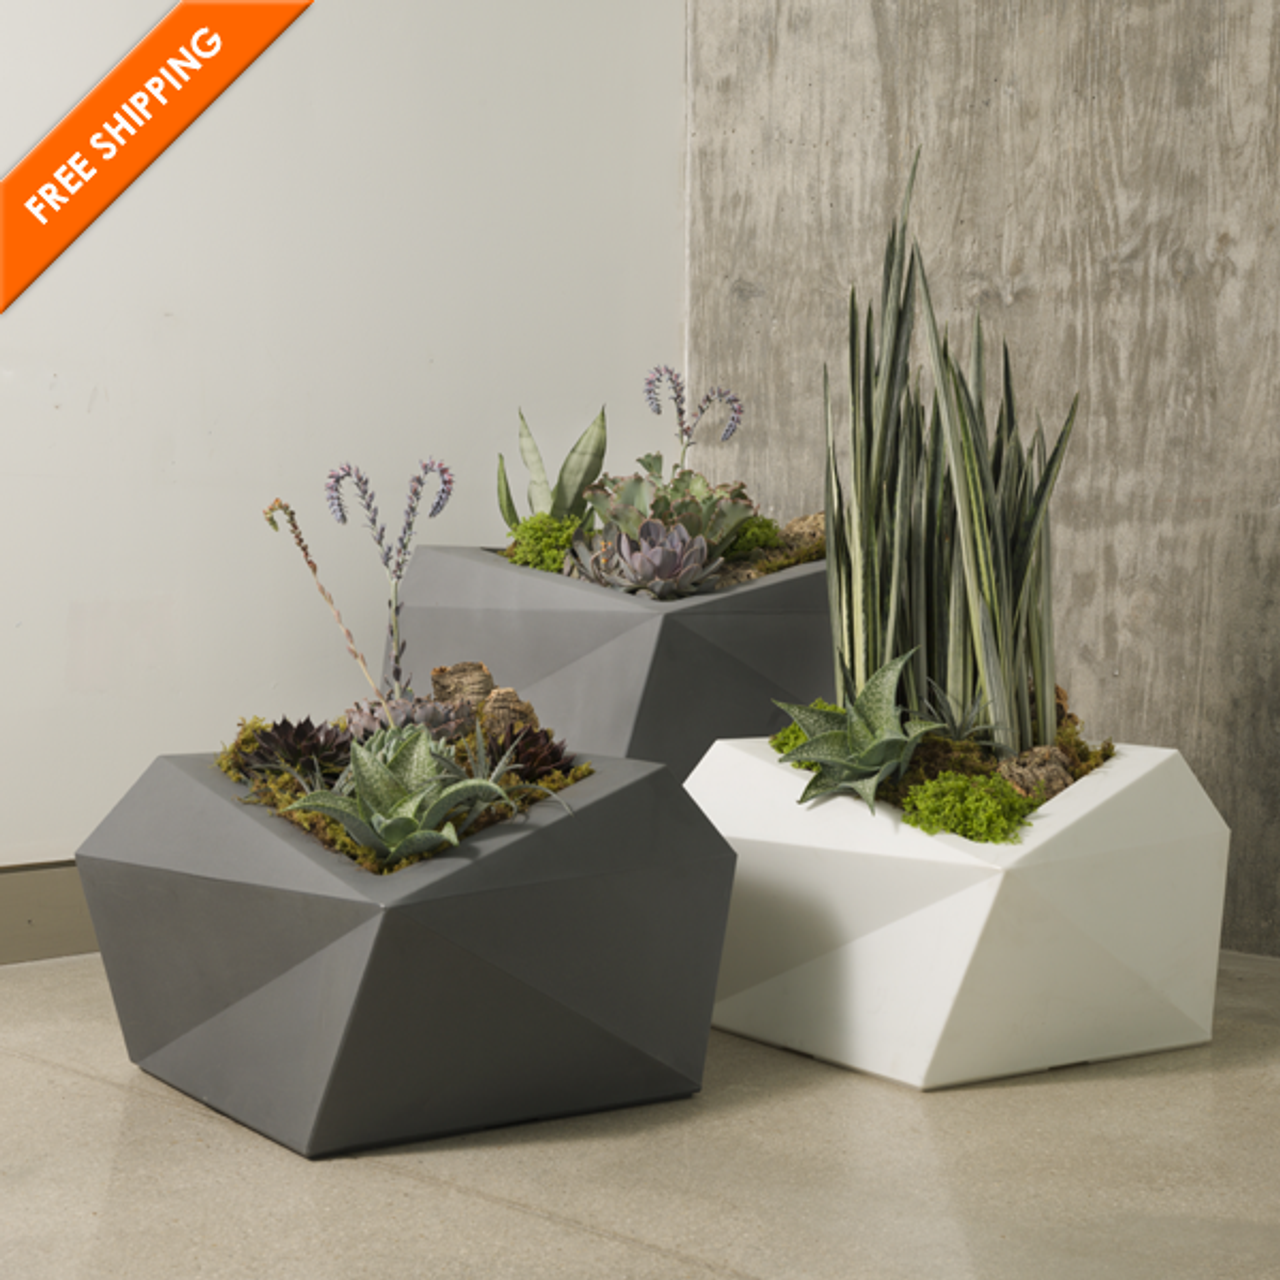 Shape-Shifting 'Origami' Pots That Grow Together With Your Plants